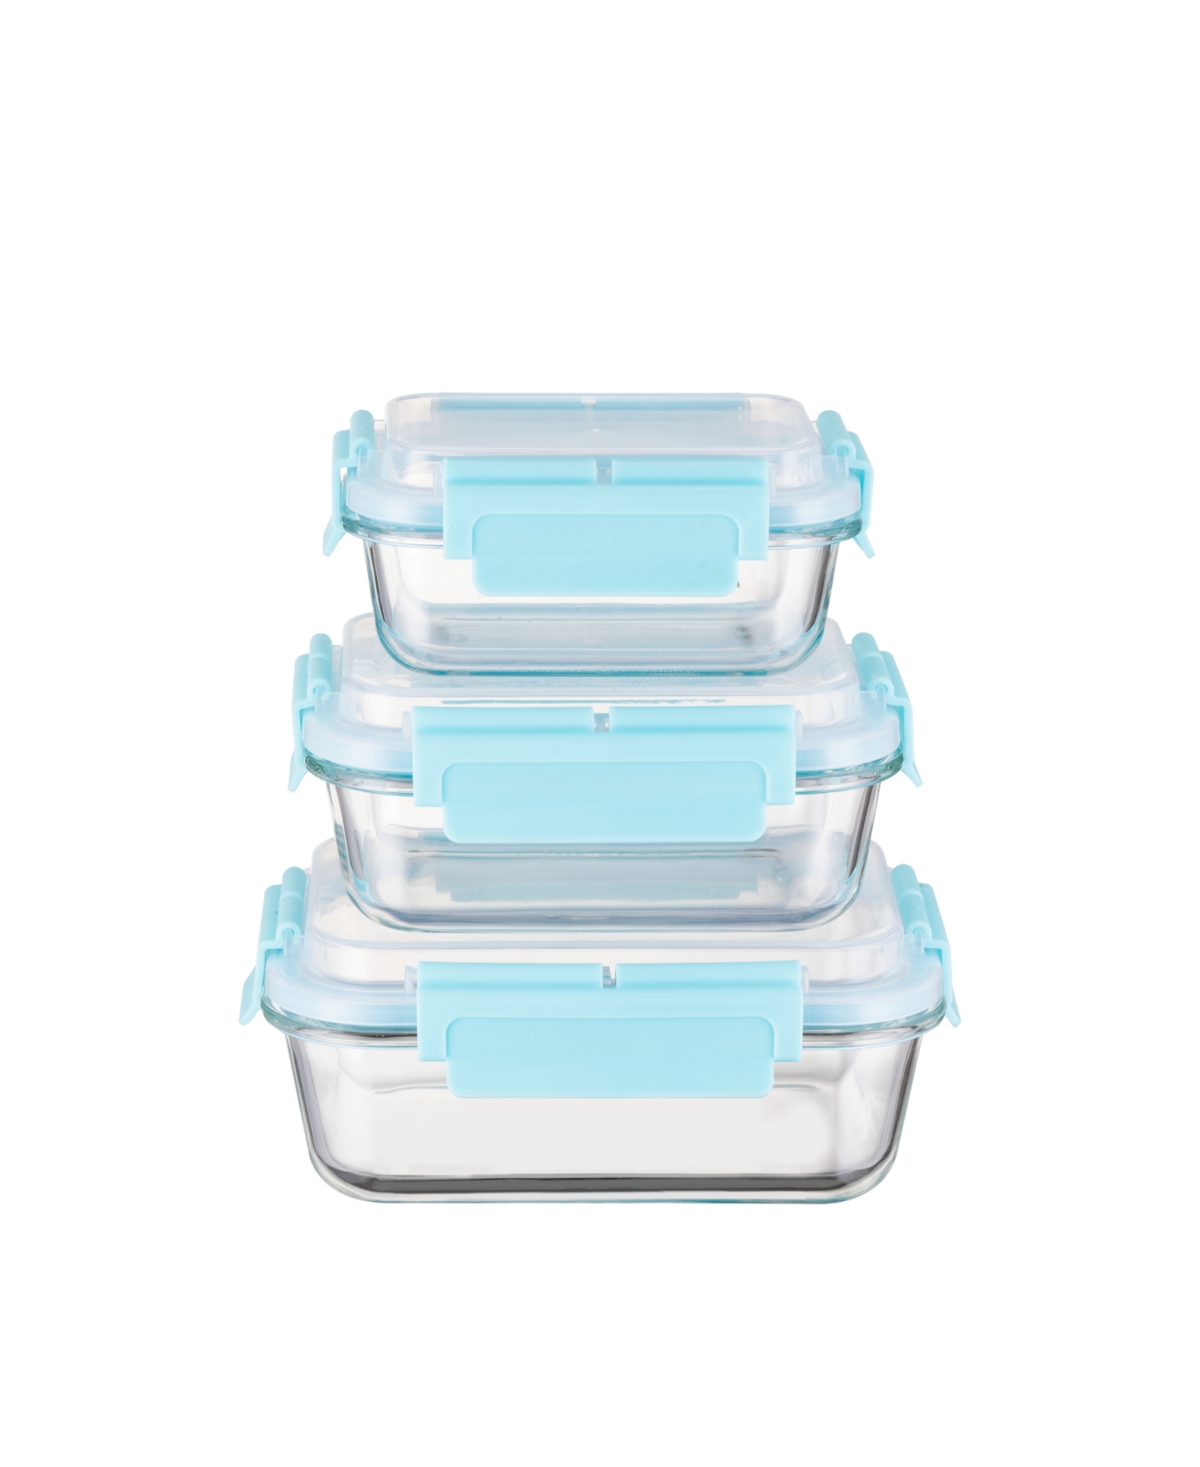 Genicook 3 Pc Rectangular Container Hi-top Lids With Pro Grade Removable Lockdown Levers Set In Aqua Blue